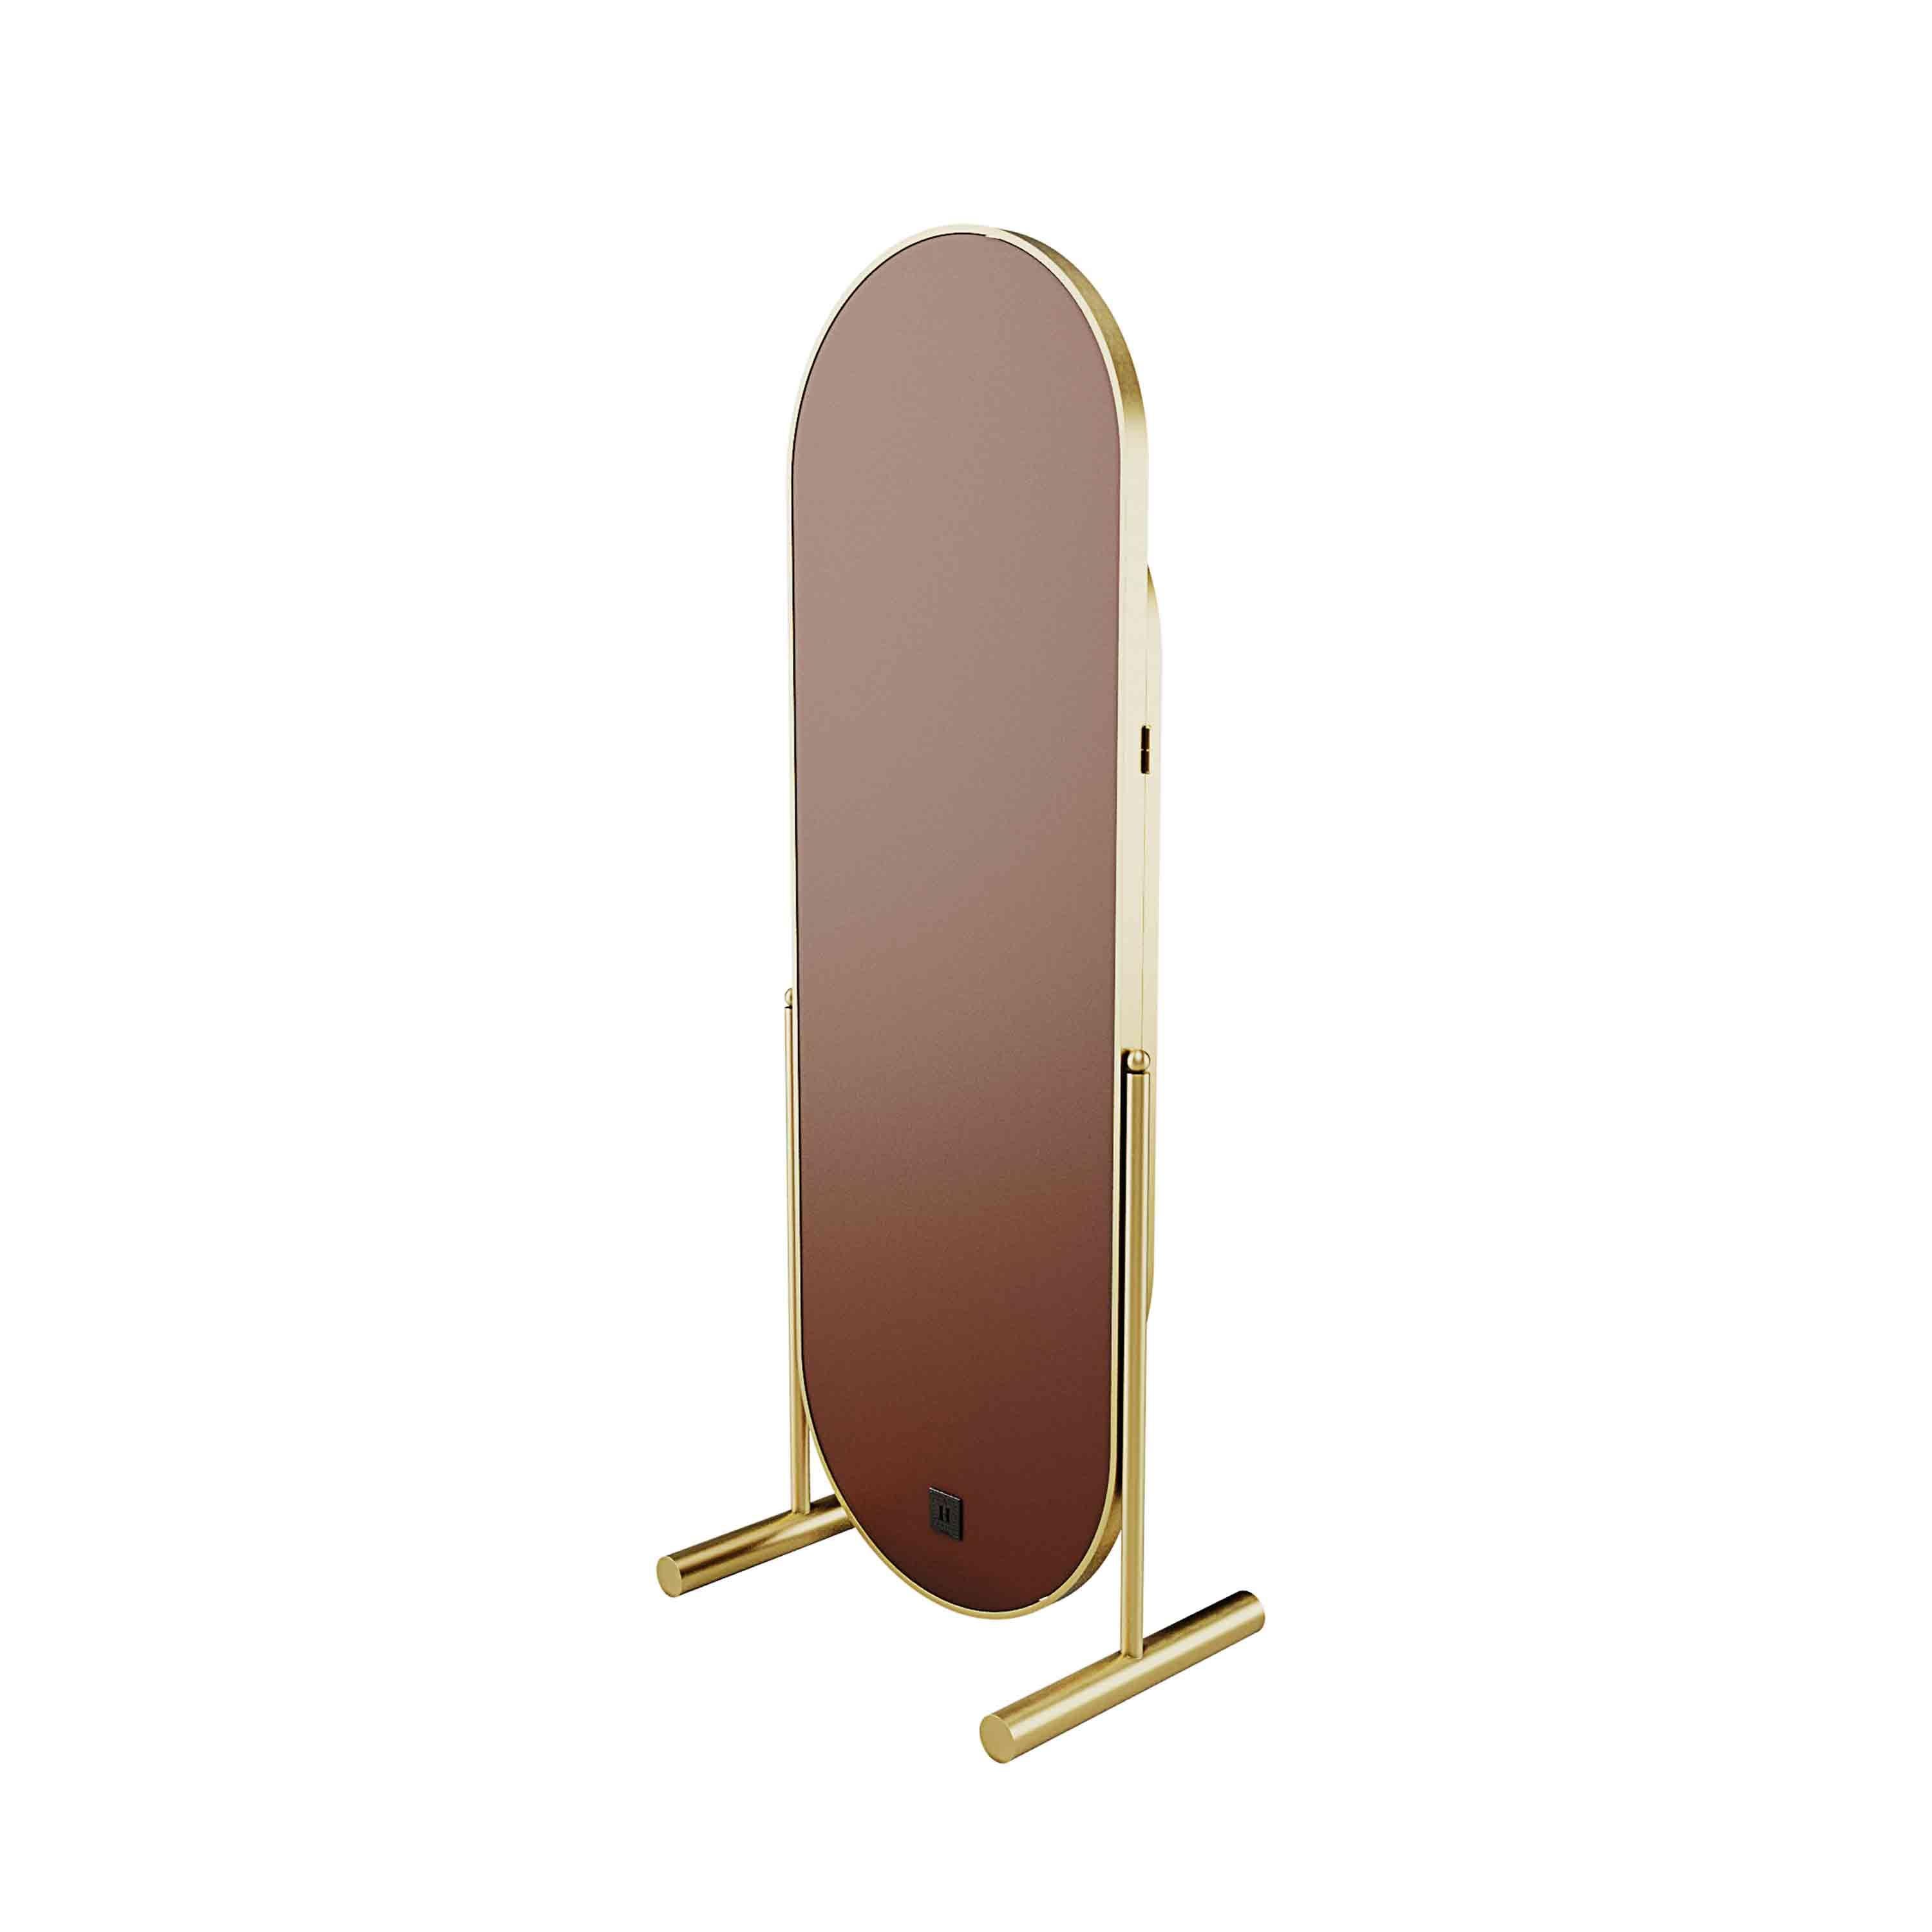 Art Deco Style Standing Floor Mirror With Leather Folding Panel & Brushed Brass In New Condition For Sale In Porto, PT